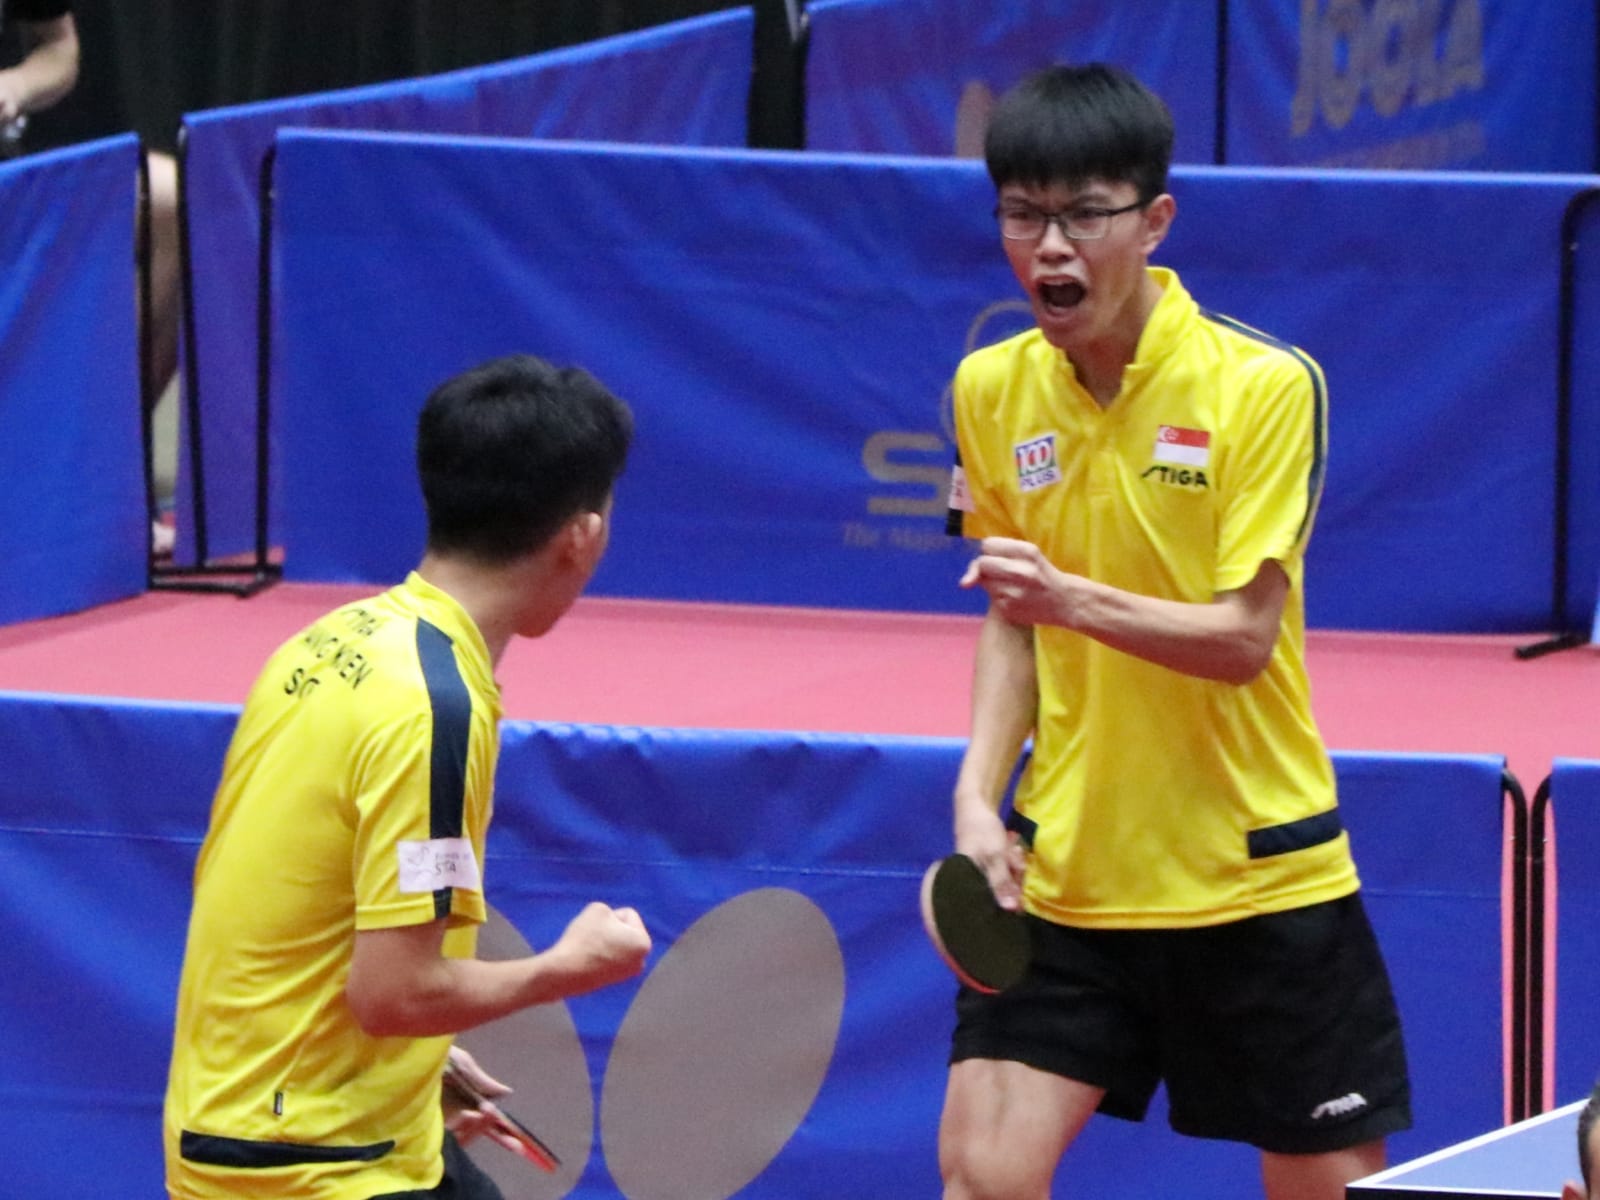 Singapore paddlers bags Republic’s first-ever bronze medal at the 2019 ITTF World Junior Table Tennis Championships, 24 November to 1 December 2019, Korat Thailand